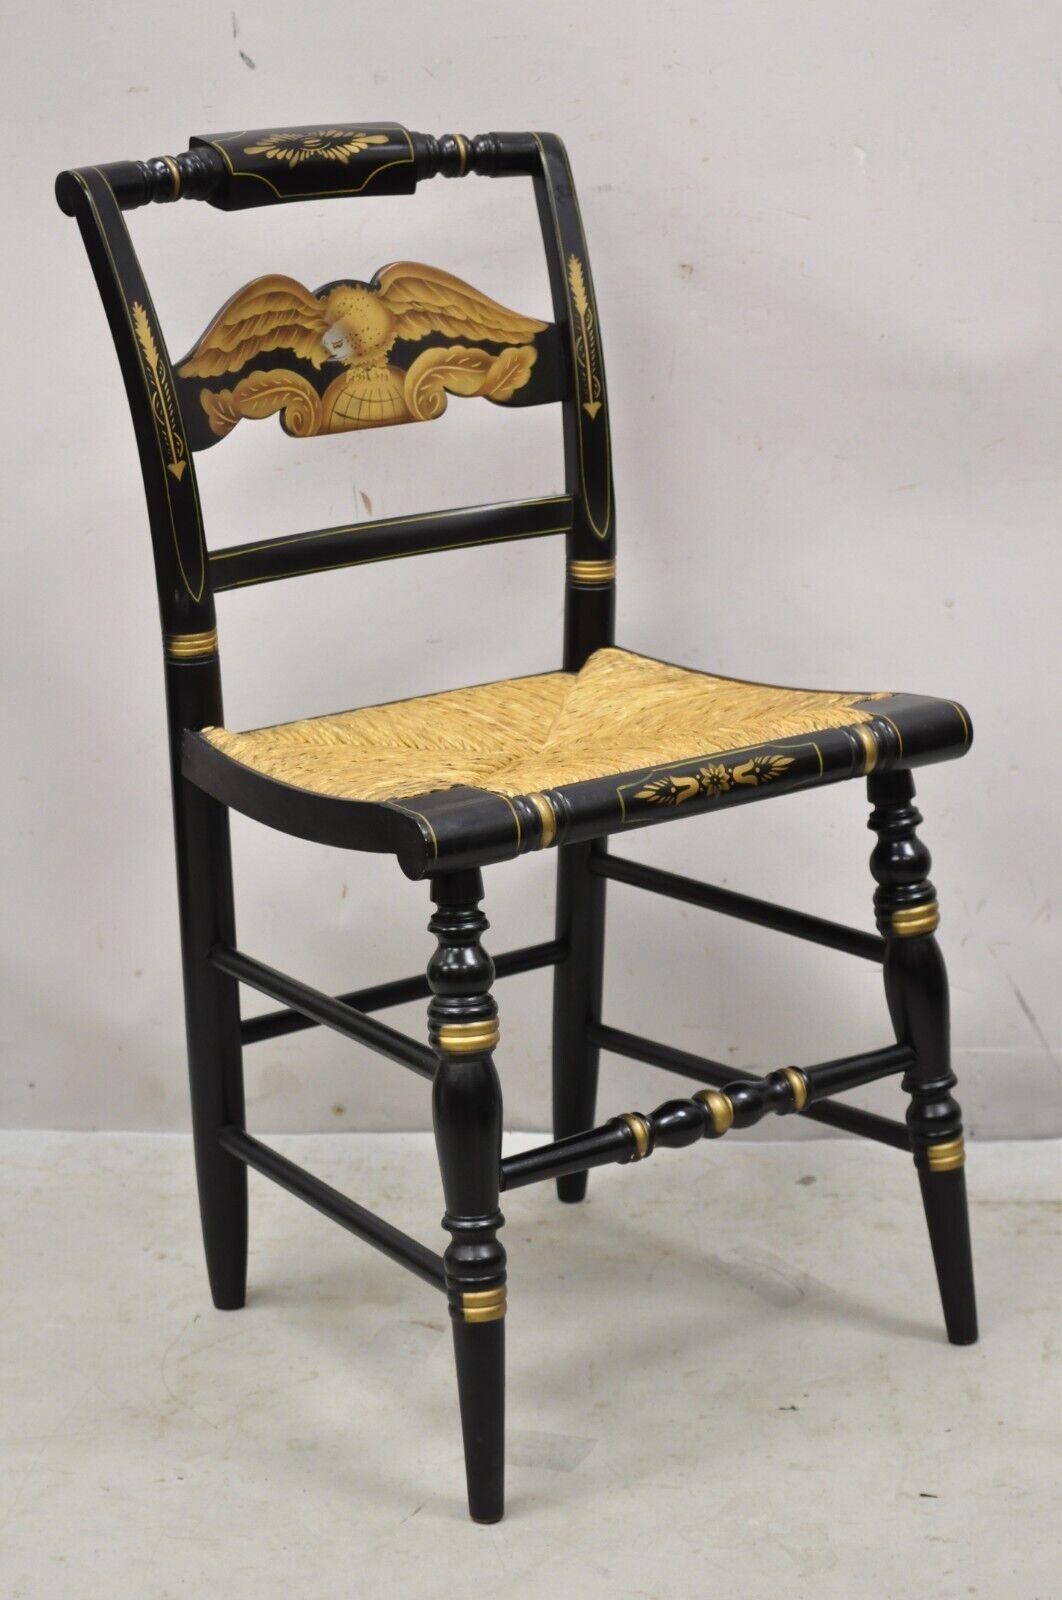 Vintage Hitchcock black side chair with gold eagle rope cord seat. Item features a woven rope cord seat, black painted finish, gold stencil painted eagle, solid wood frames, original signature, quality American craftsmanship, great style and form,